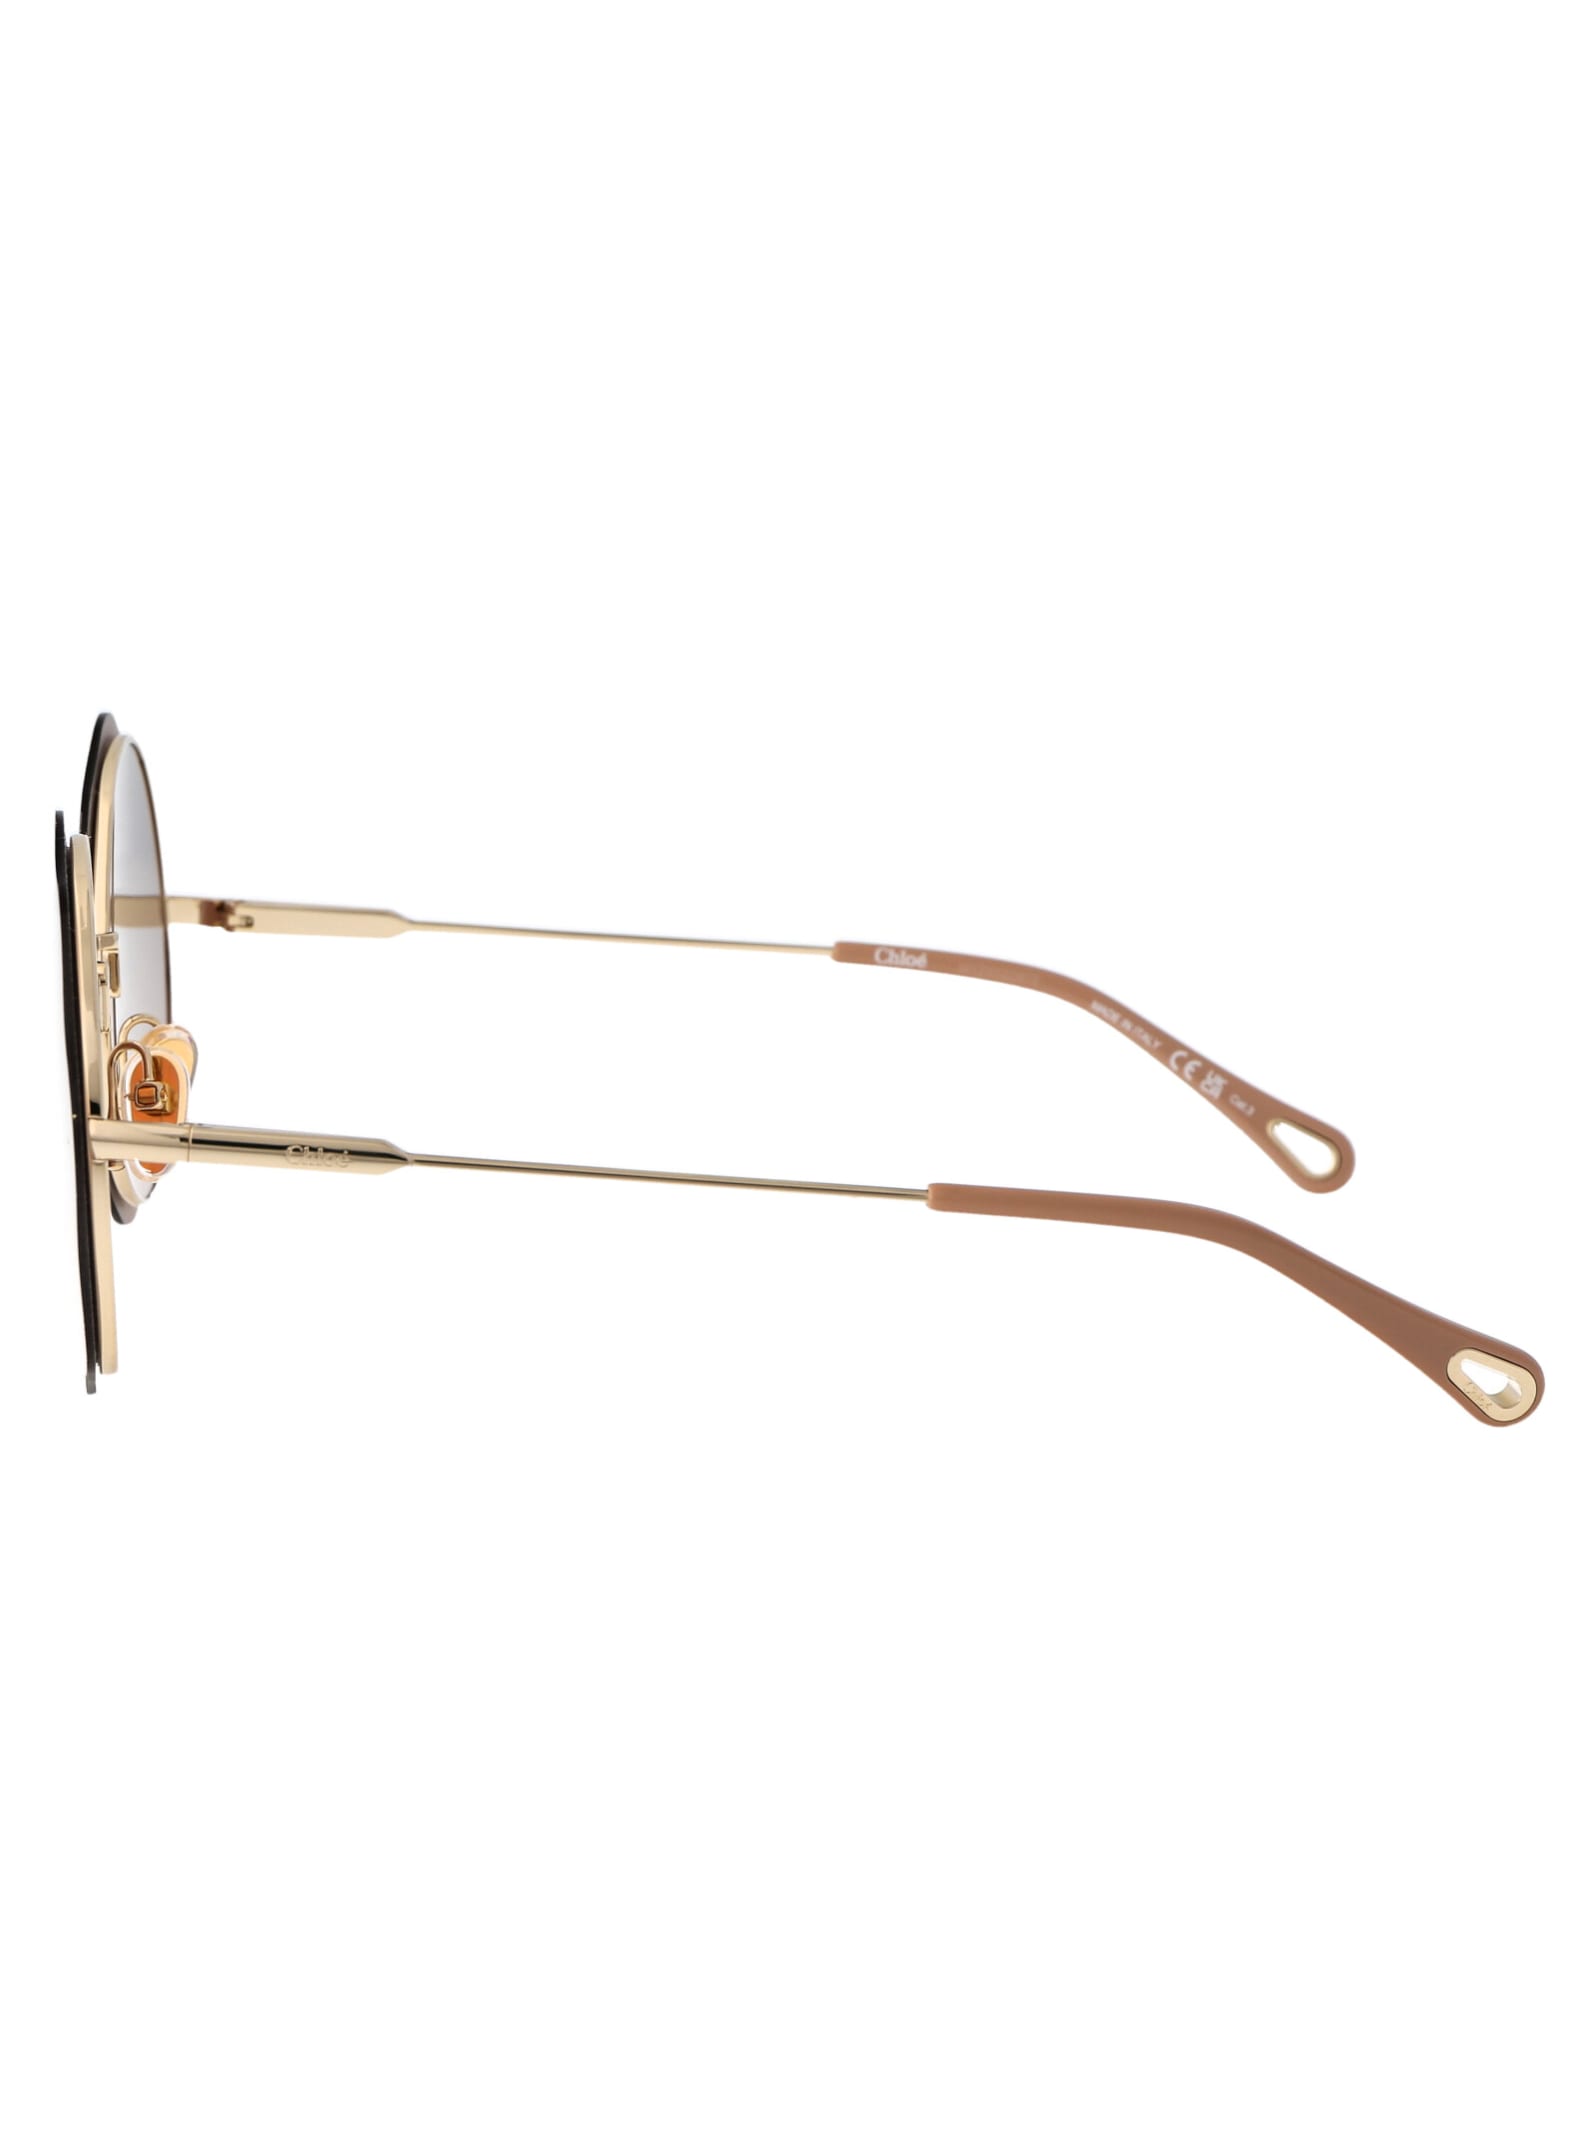 Shop Chloé Ch0202s Sunglasses In 004 Gold Gold Brown